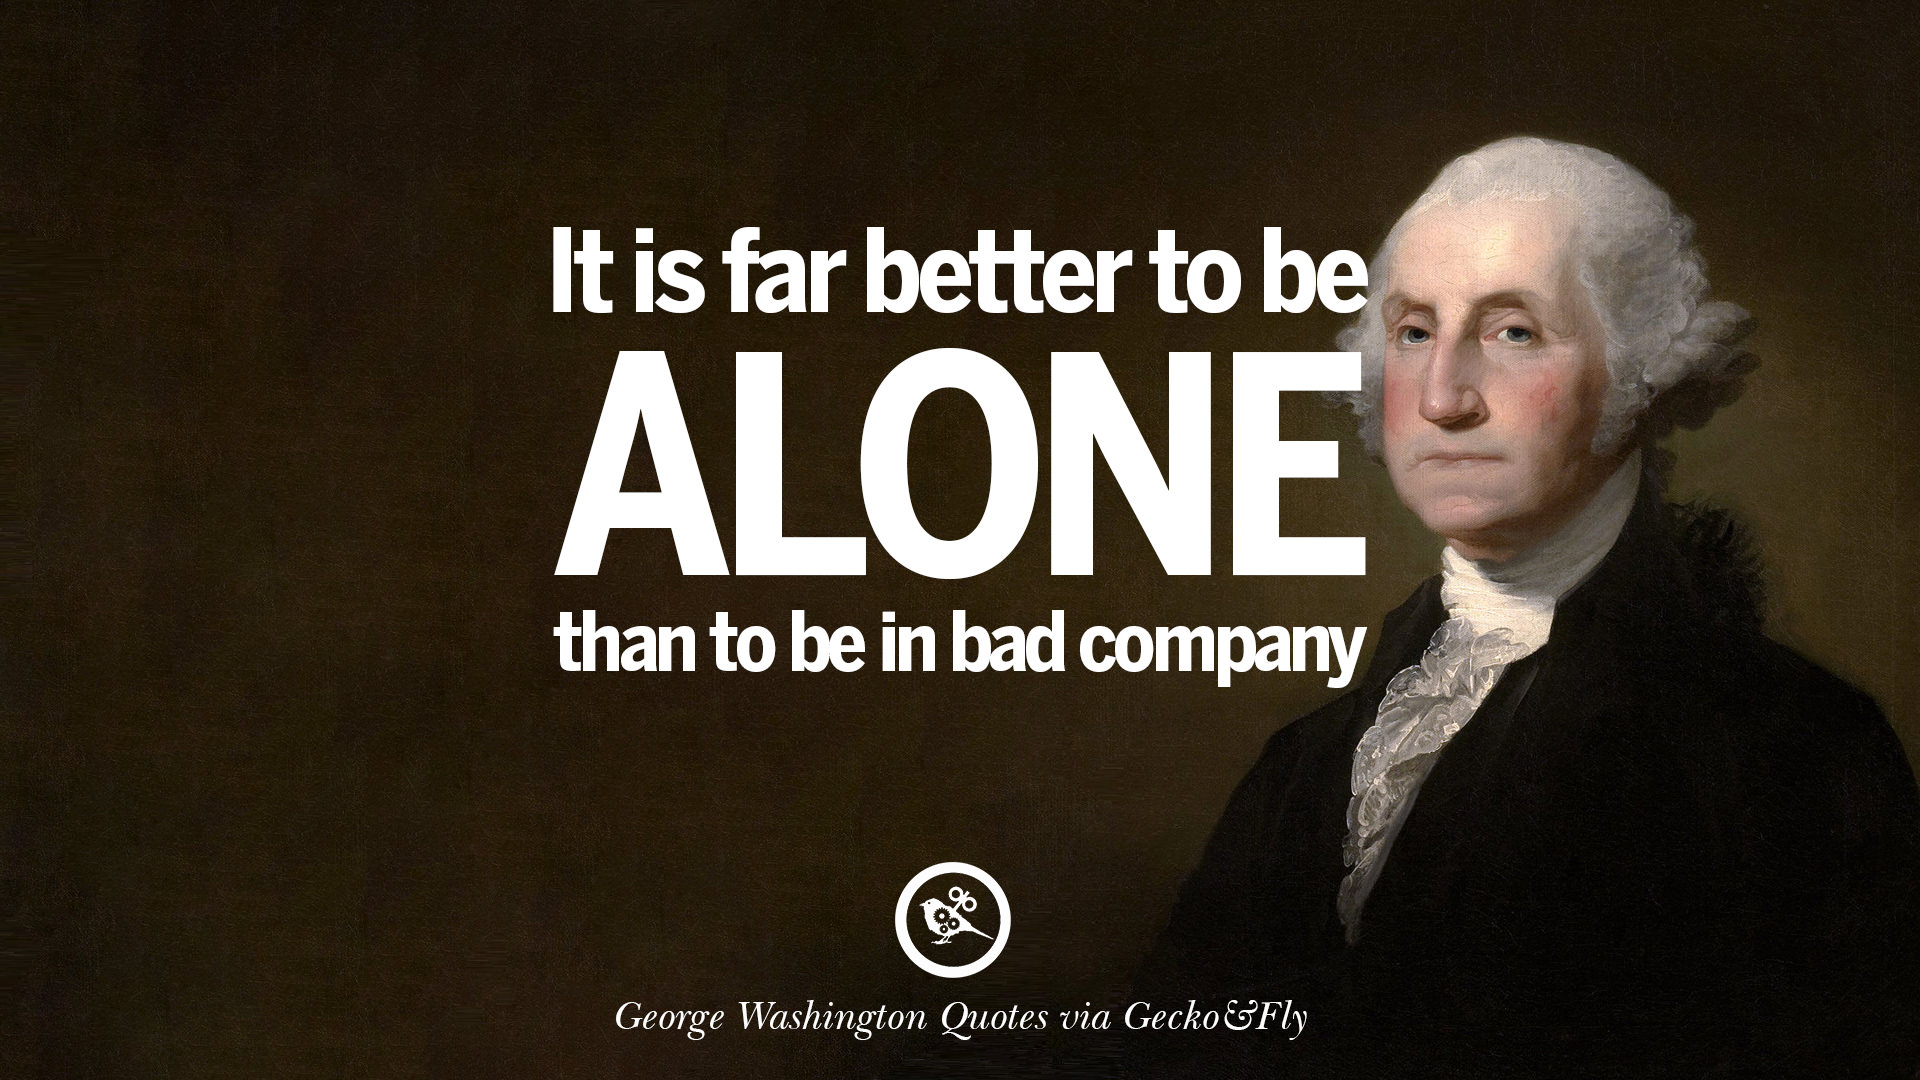 Best George Washington Quotes On Freedom The ultimate guide ...